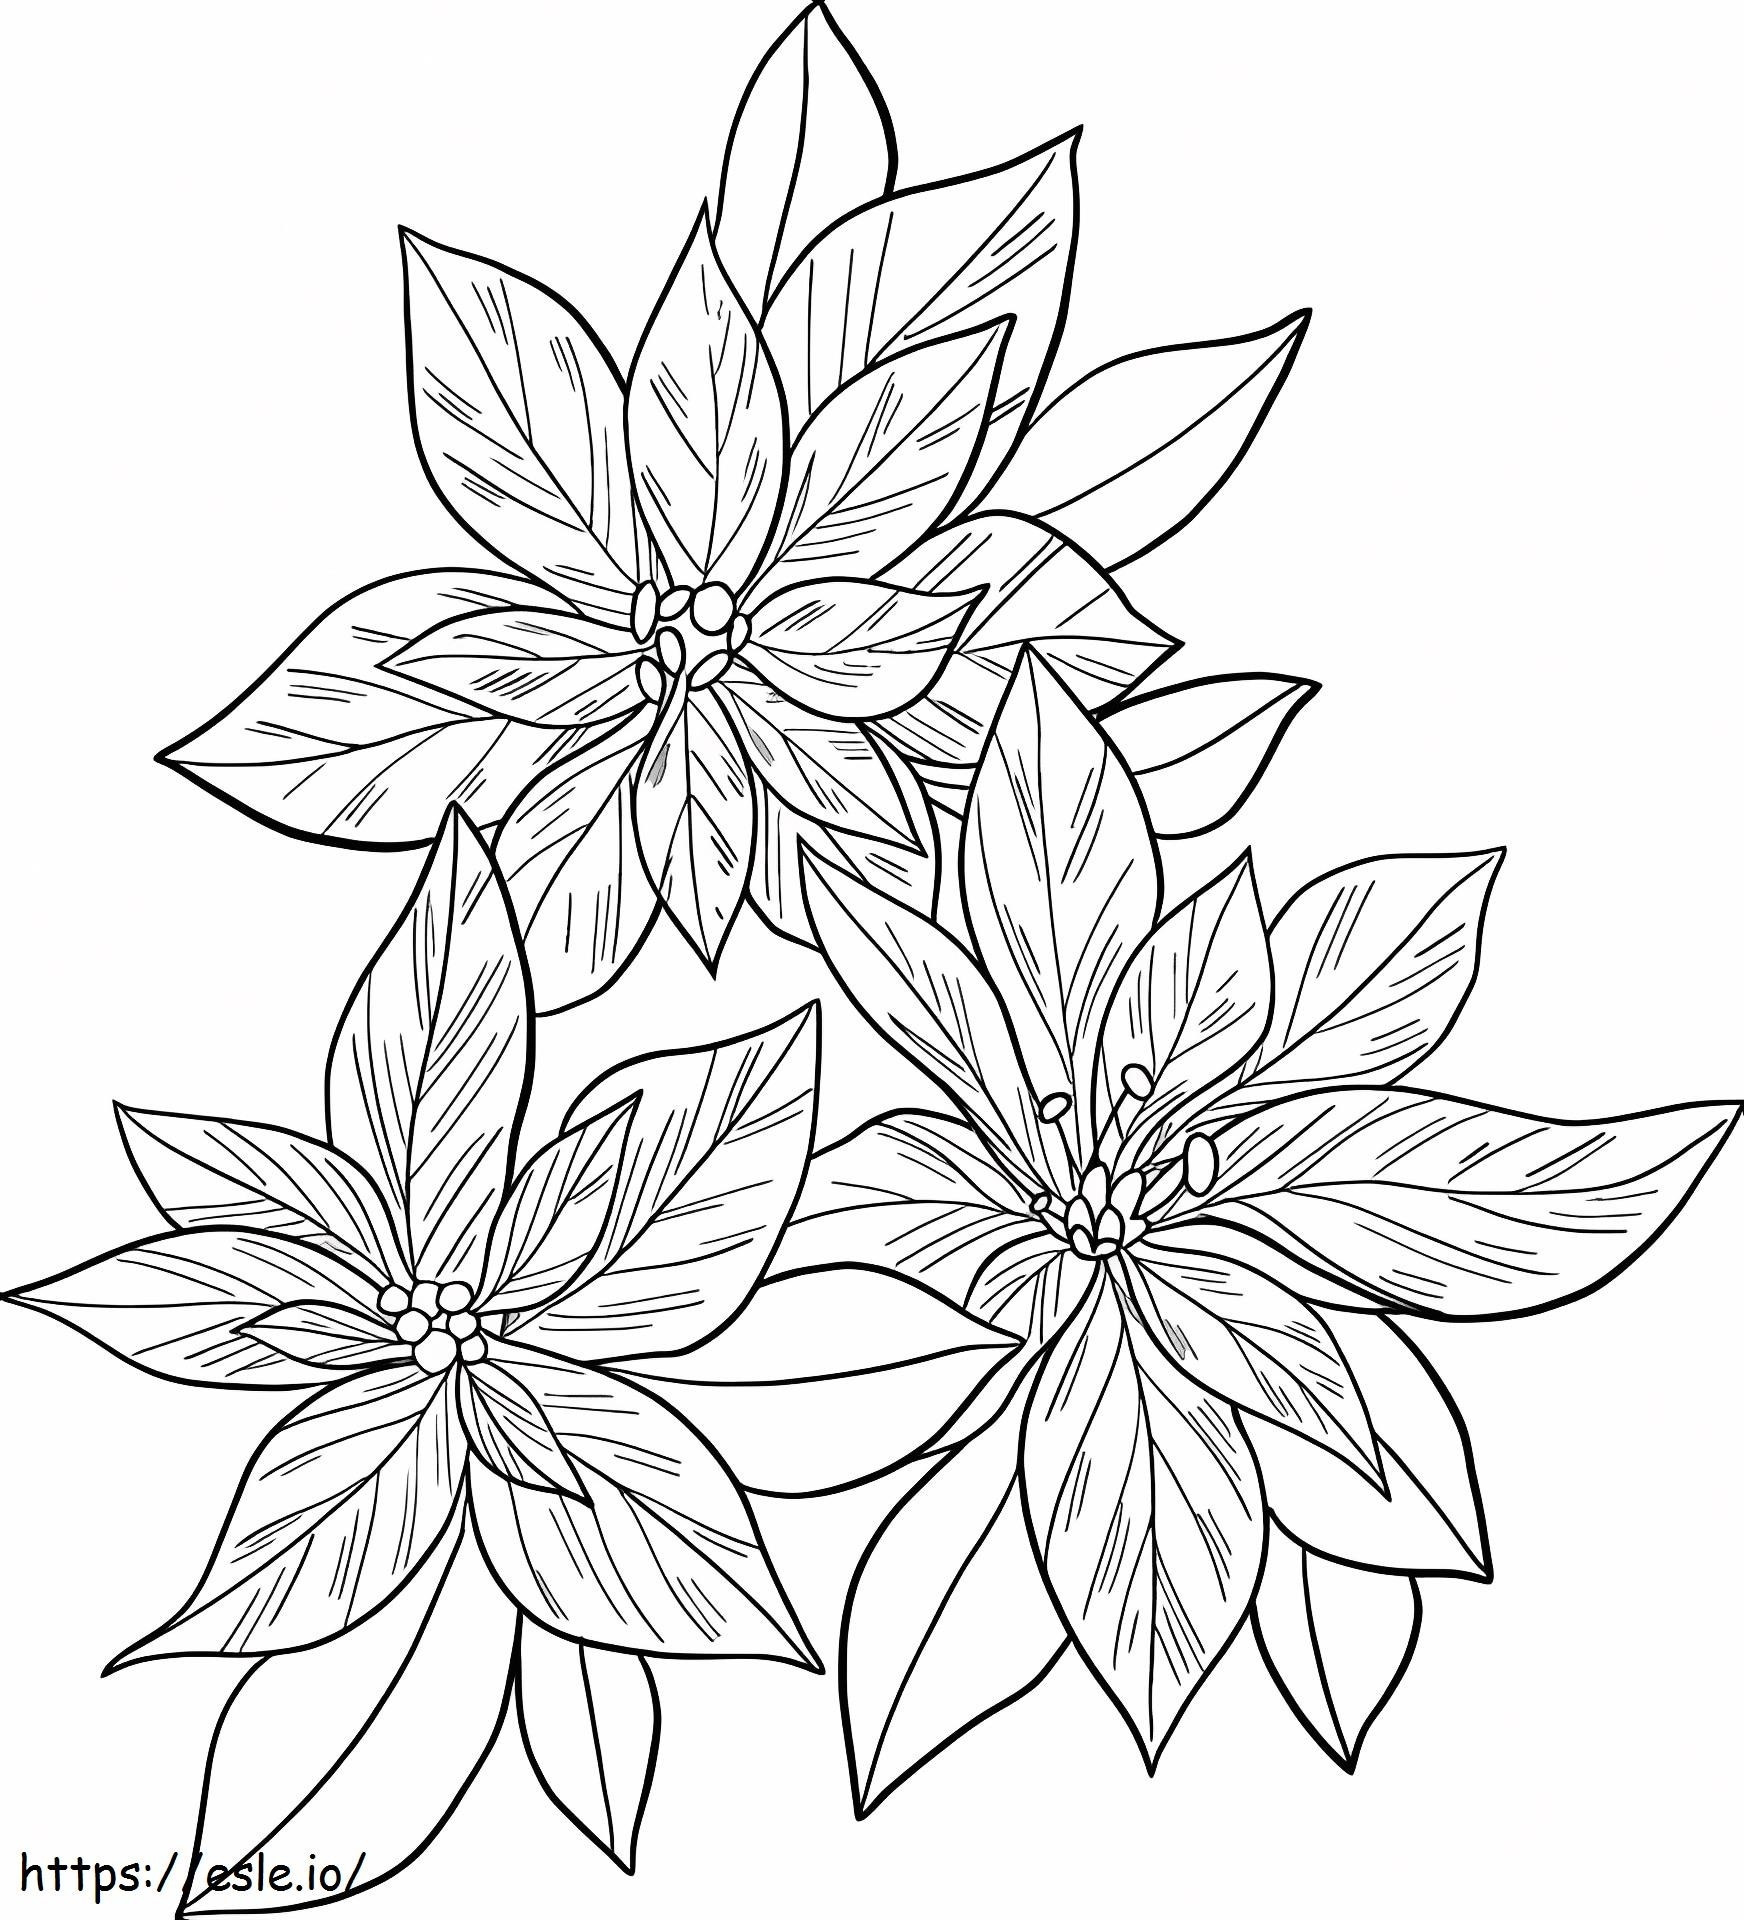 Three Hard Poinsettias coloring page